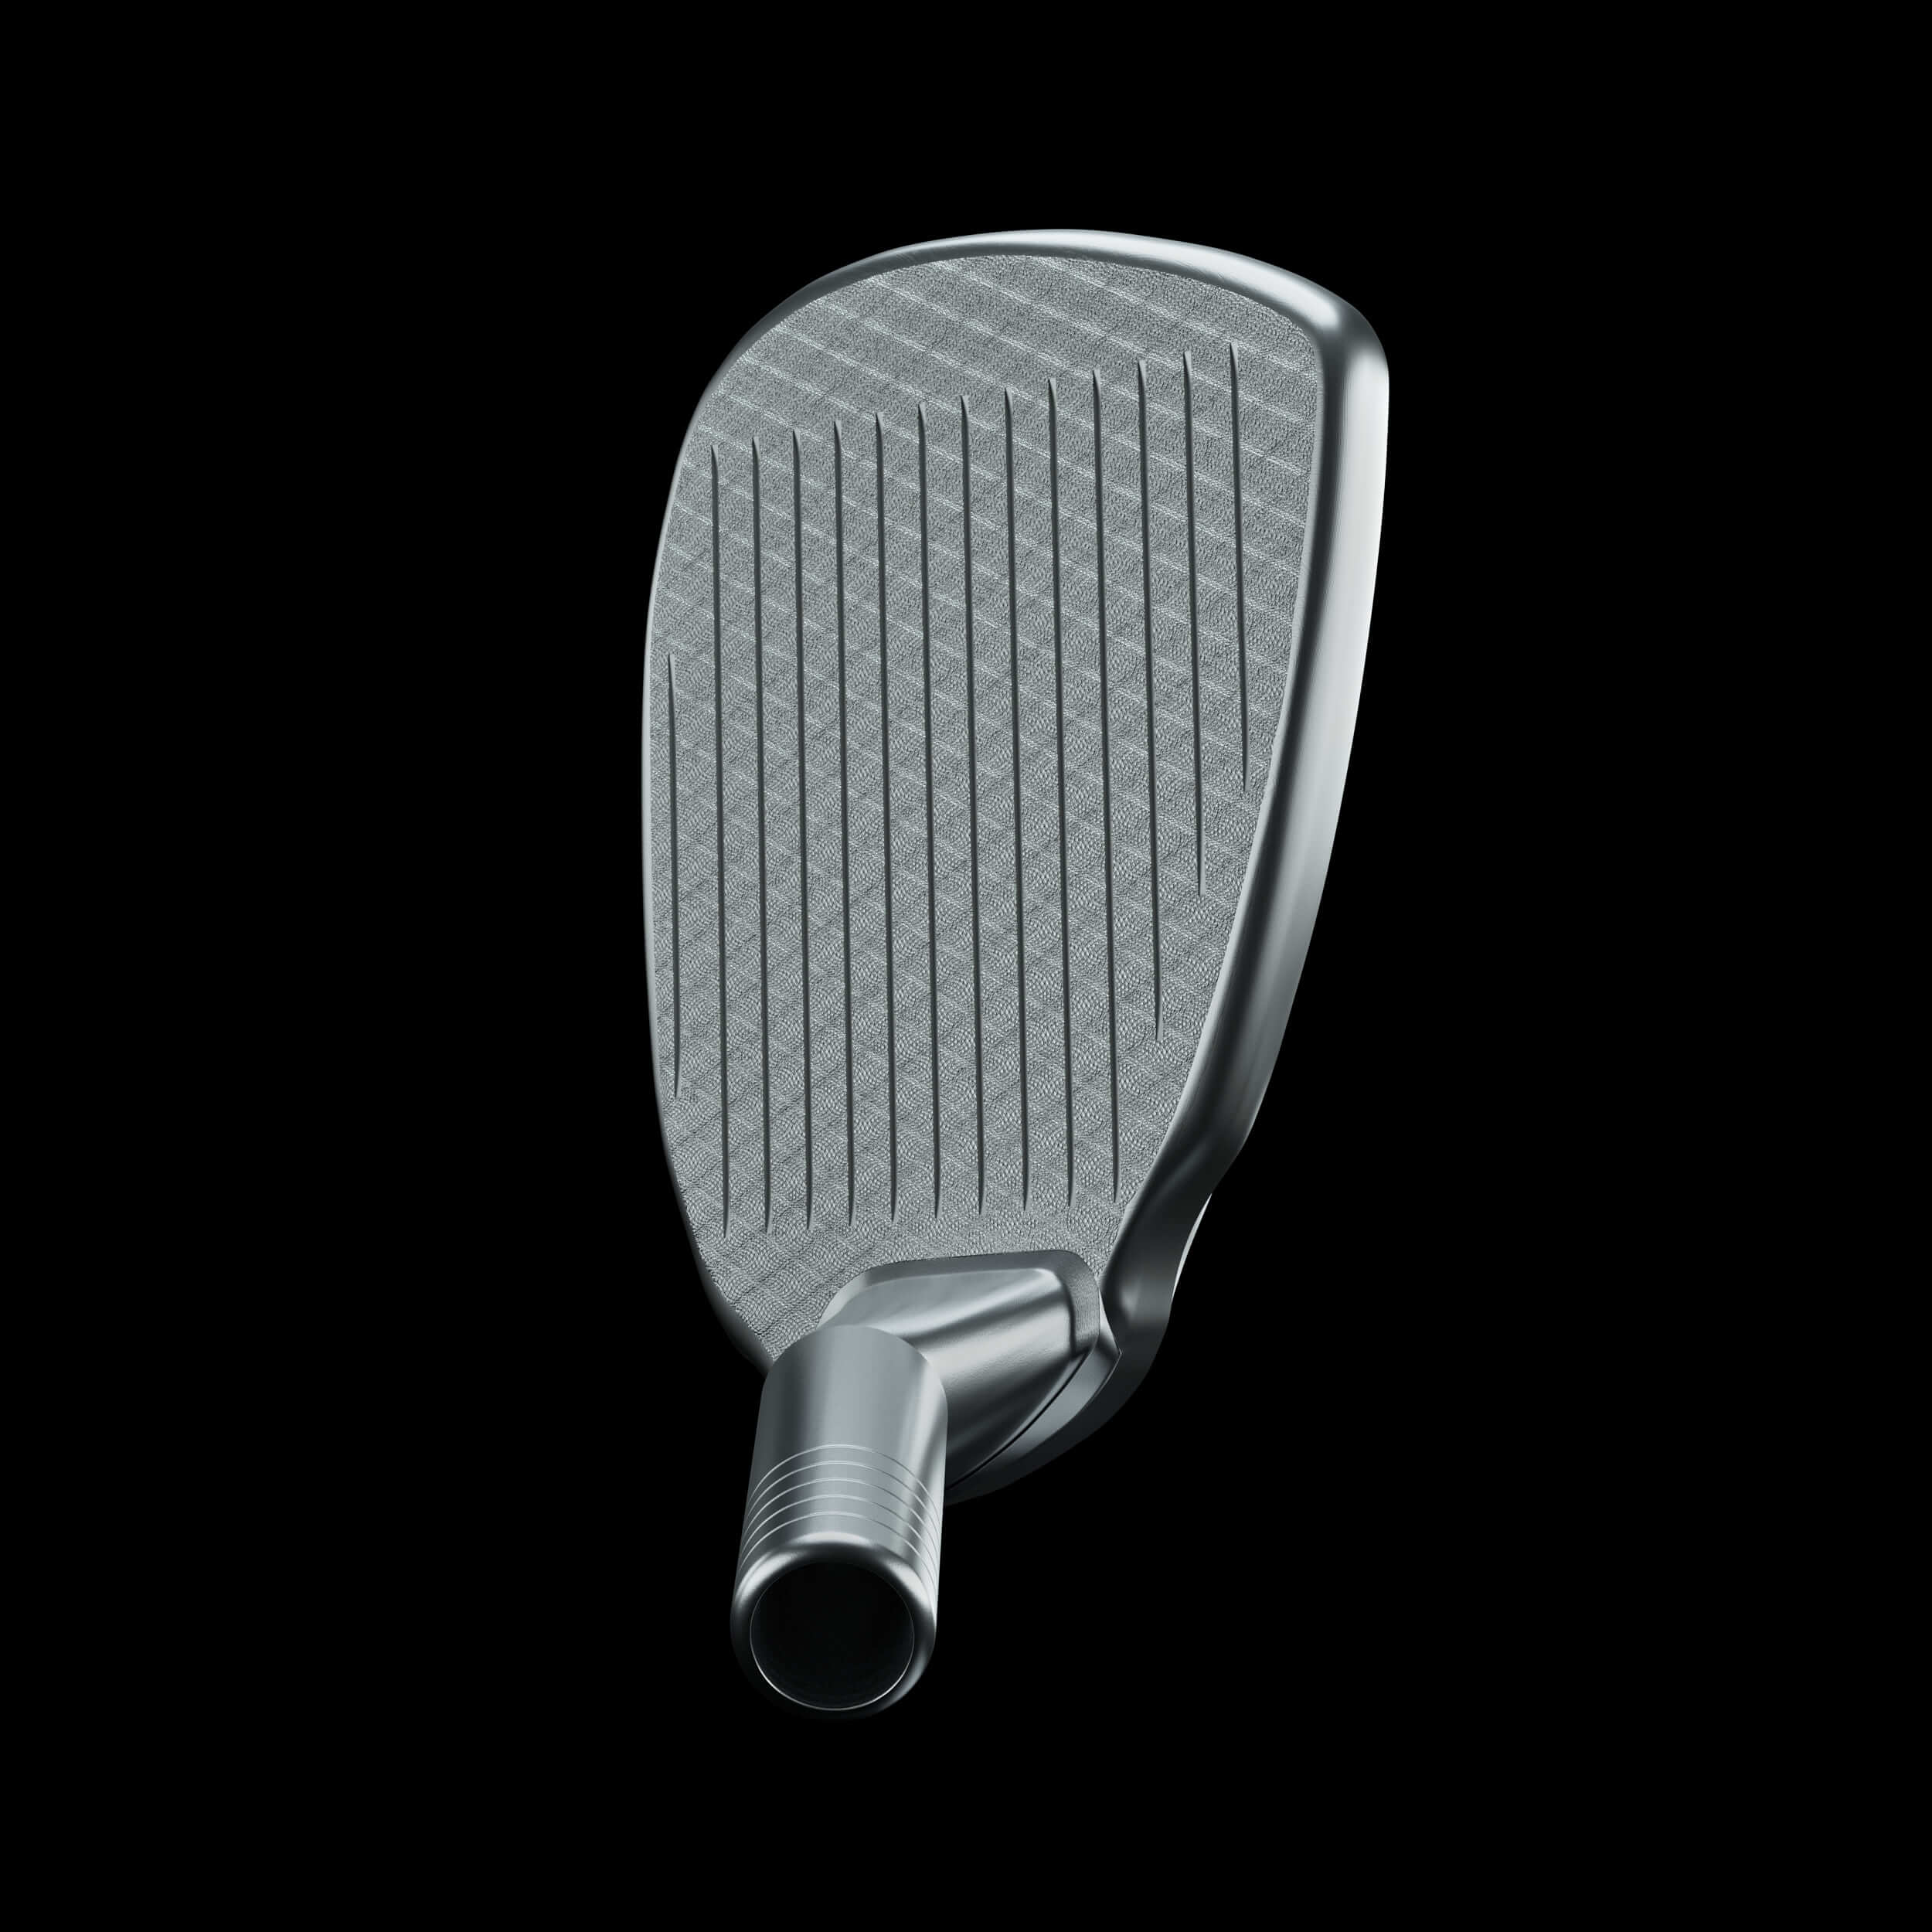 MOD™/1 WEDGES from MORE GOLF